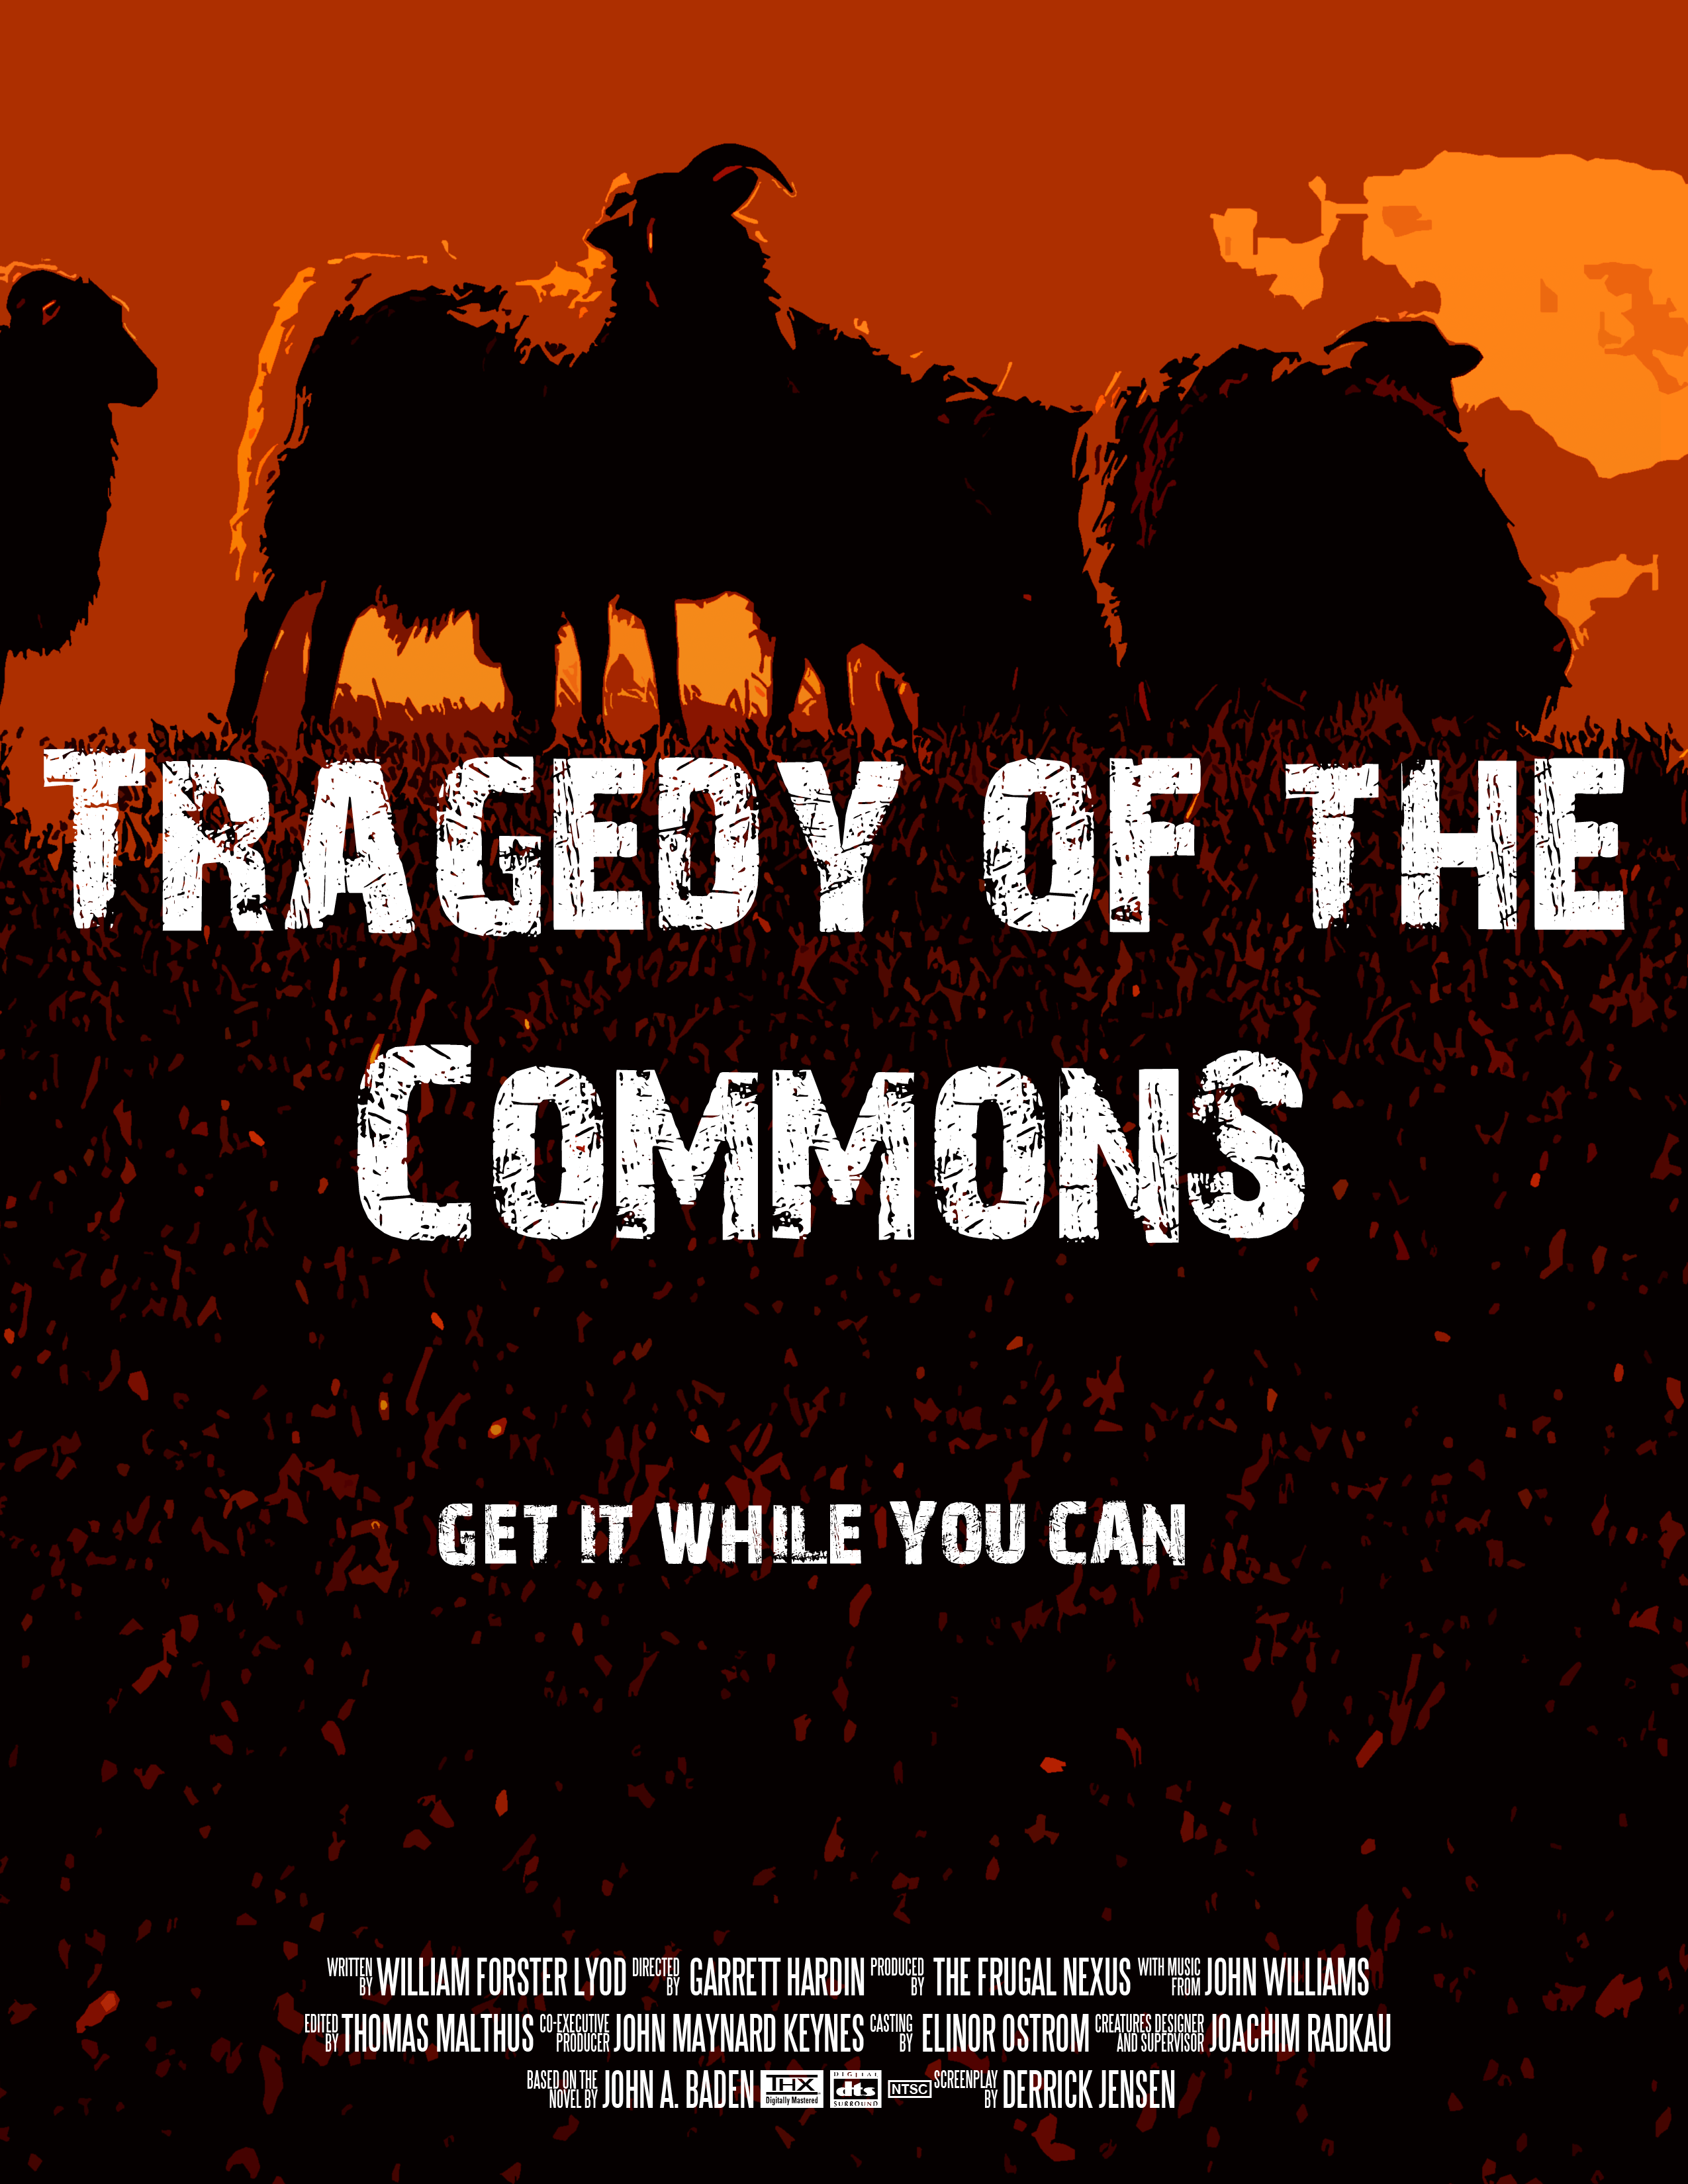 Tragedy of the commons